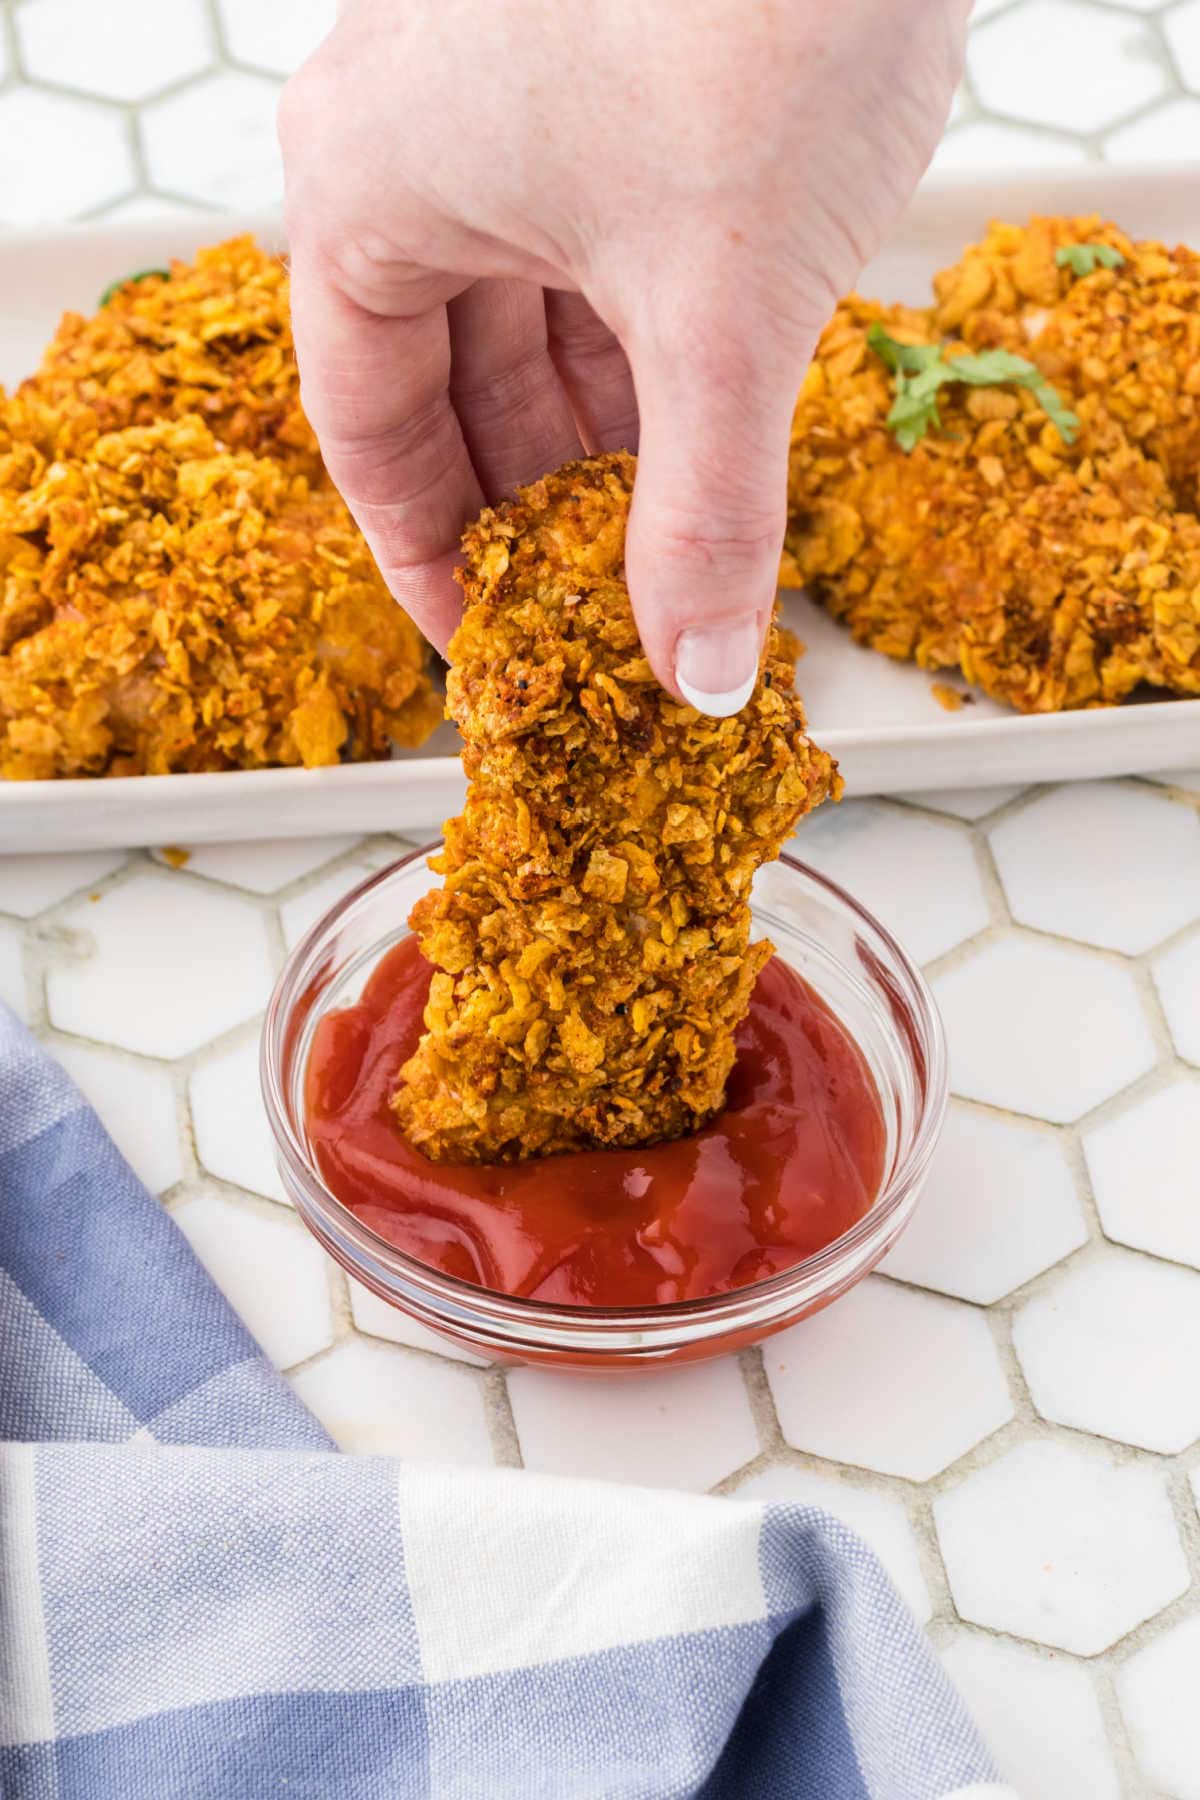 A crispy chicken tender being dipped in ketchup.